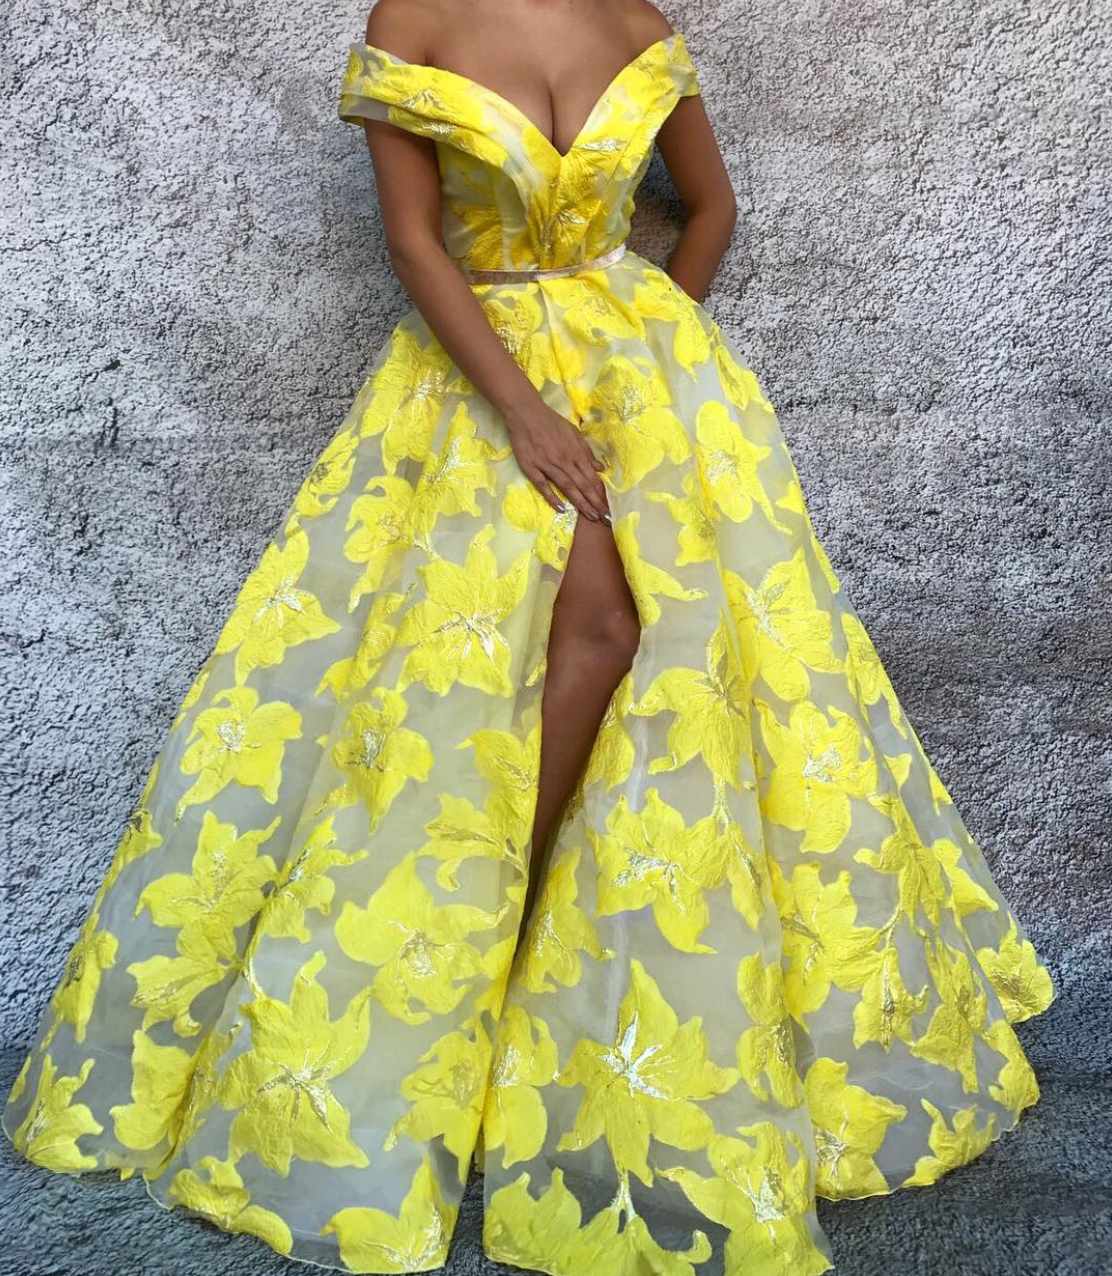 Yellow A-Line dress with off the shoulder sleeves and printed flowers